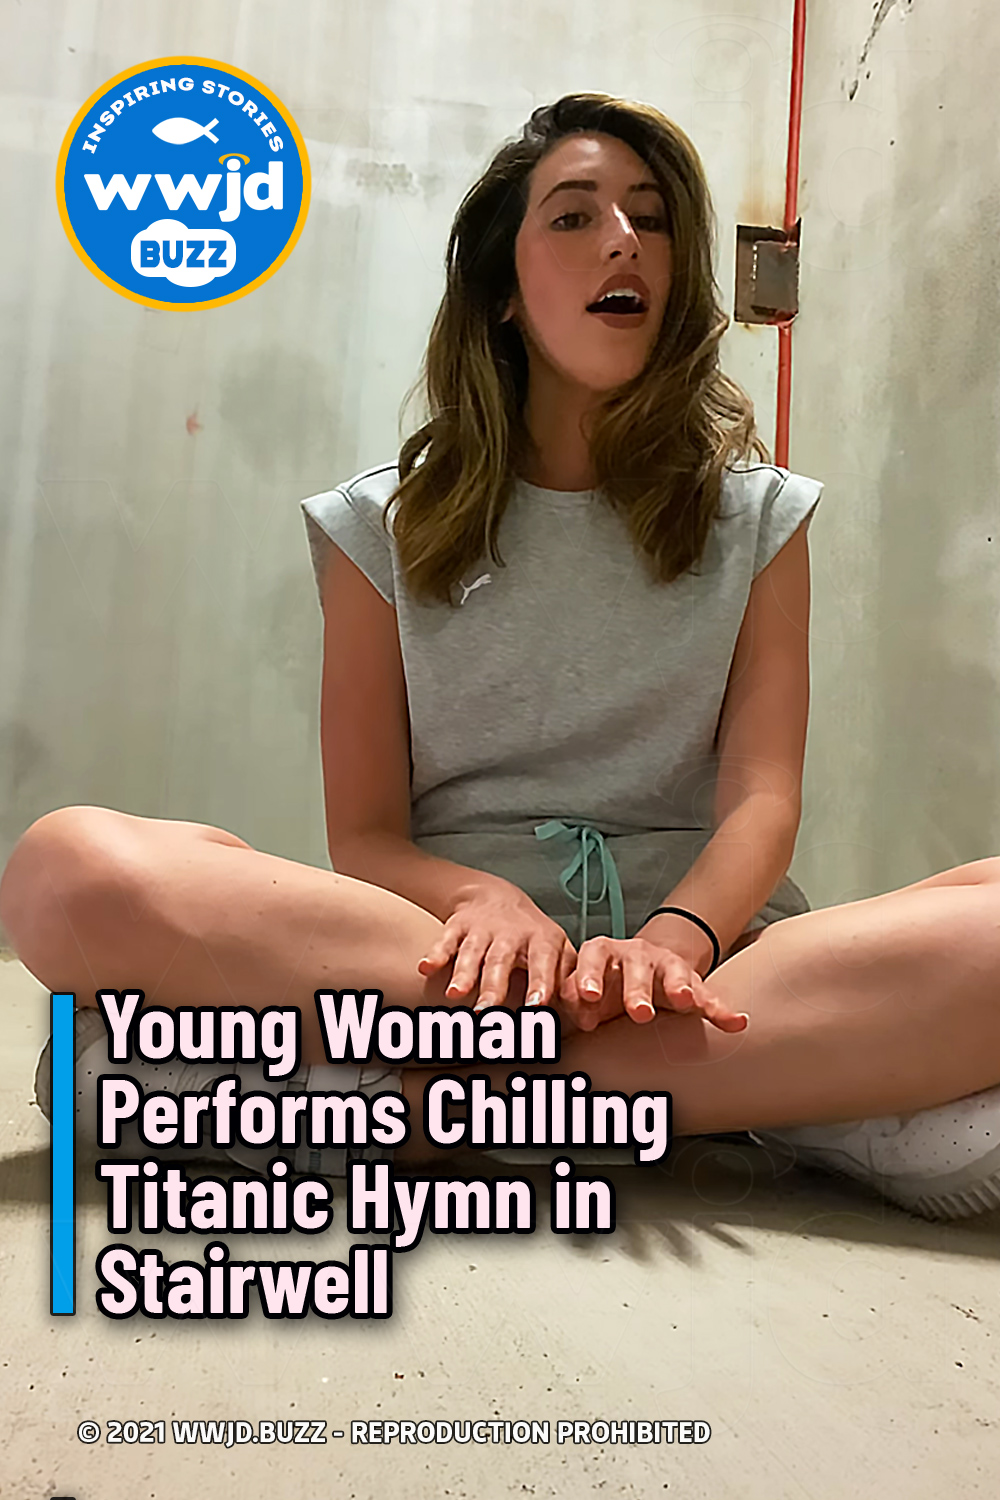 Young Woman Performs Chilling Titanic Hymn in Stairwell